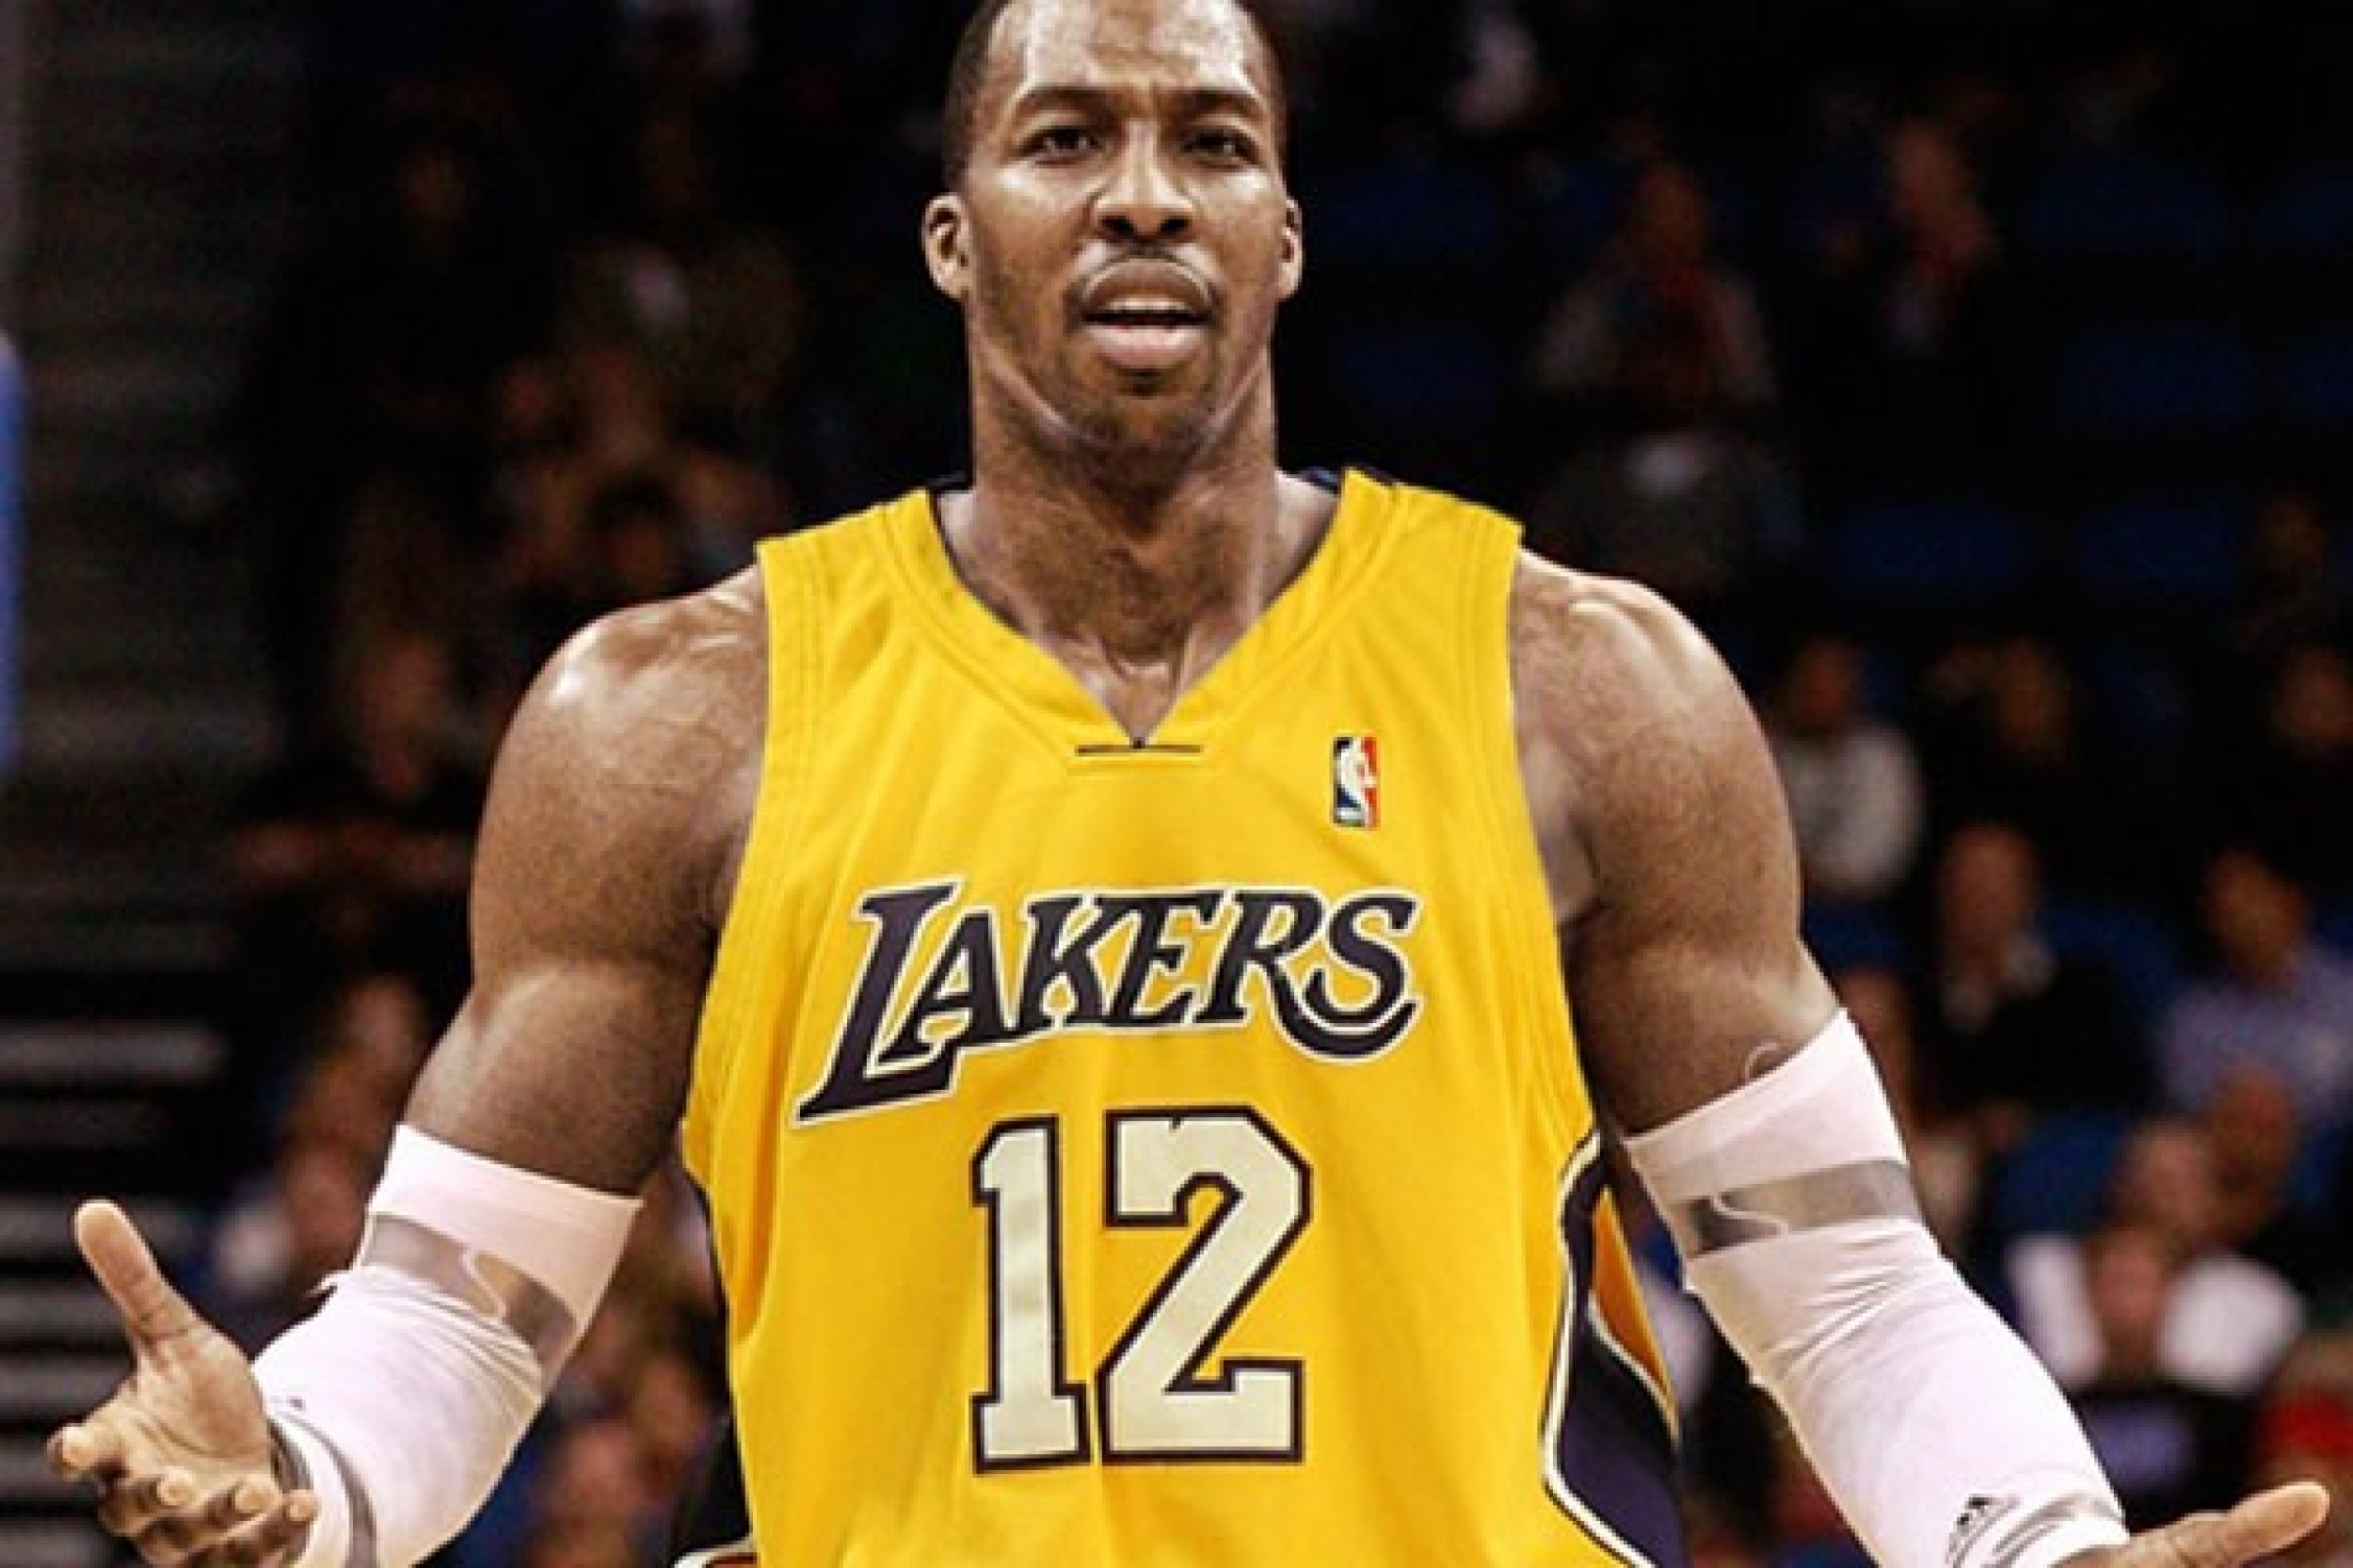 Dwight Howard heads back to Lakers, agreeing to one-year deal